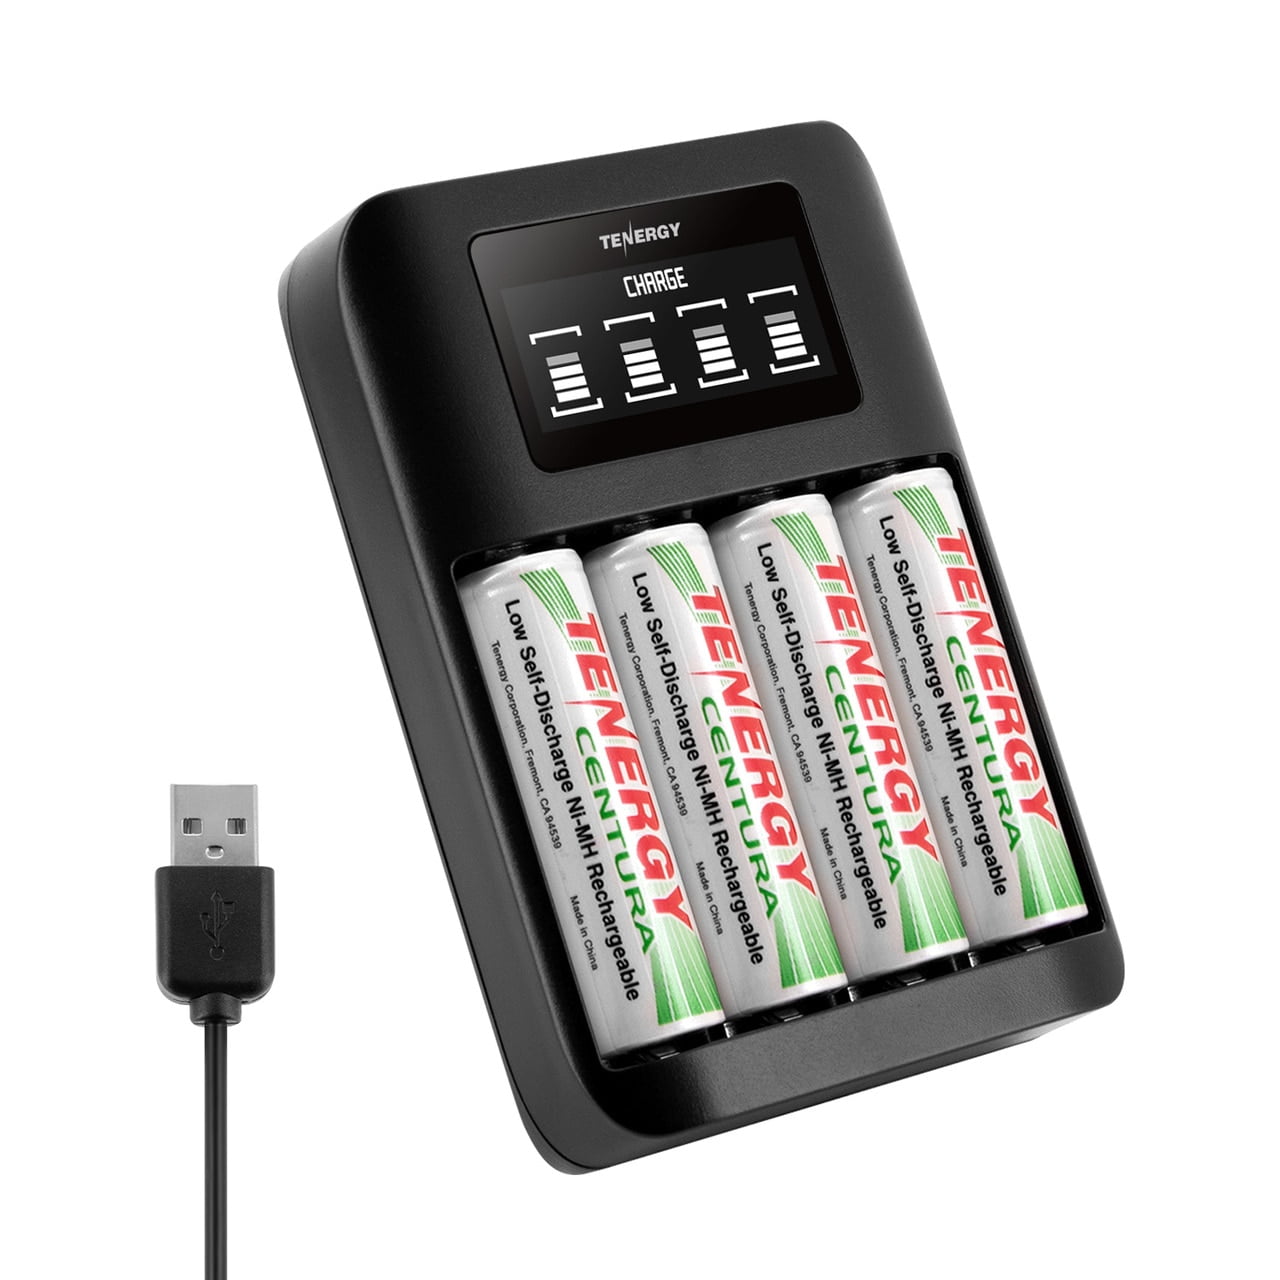 Tenergy Tn474u Battery Charger With Centura Aa Rechargeable Batteries